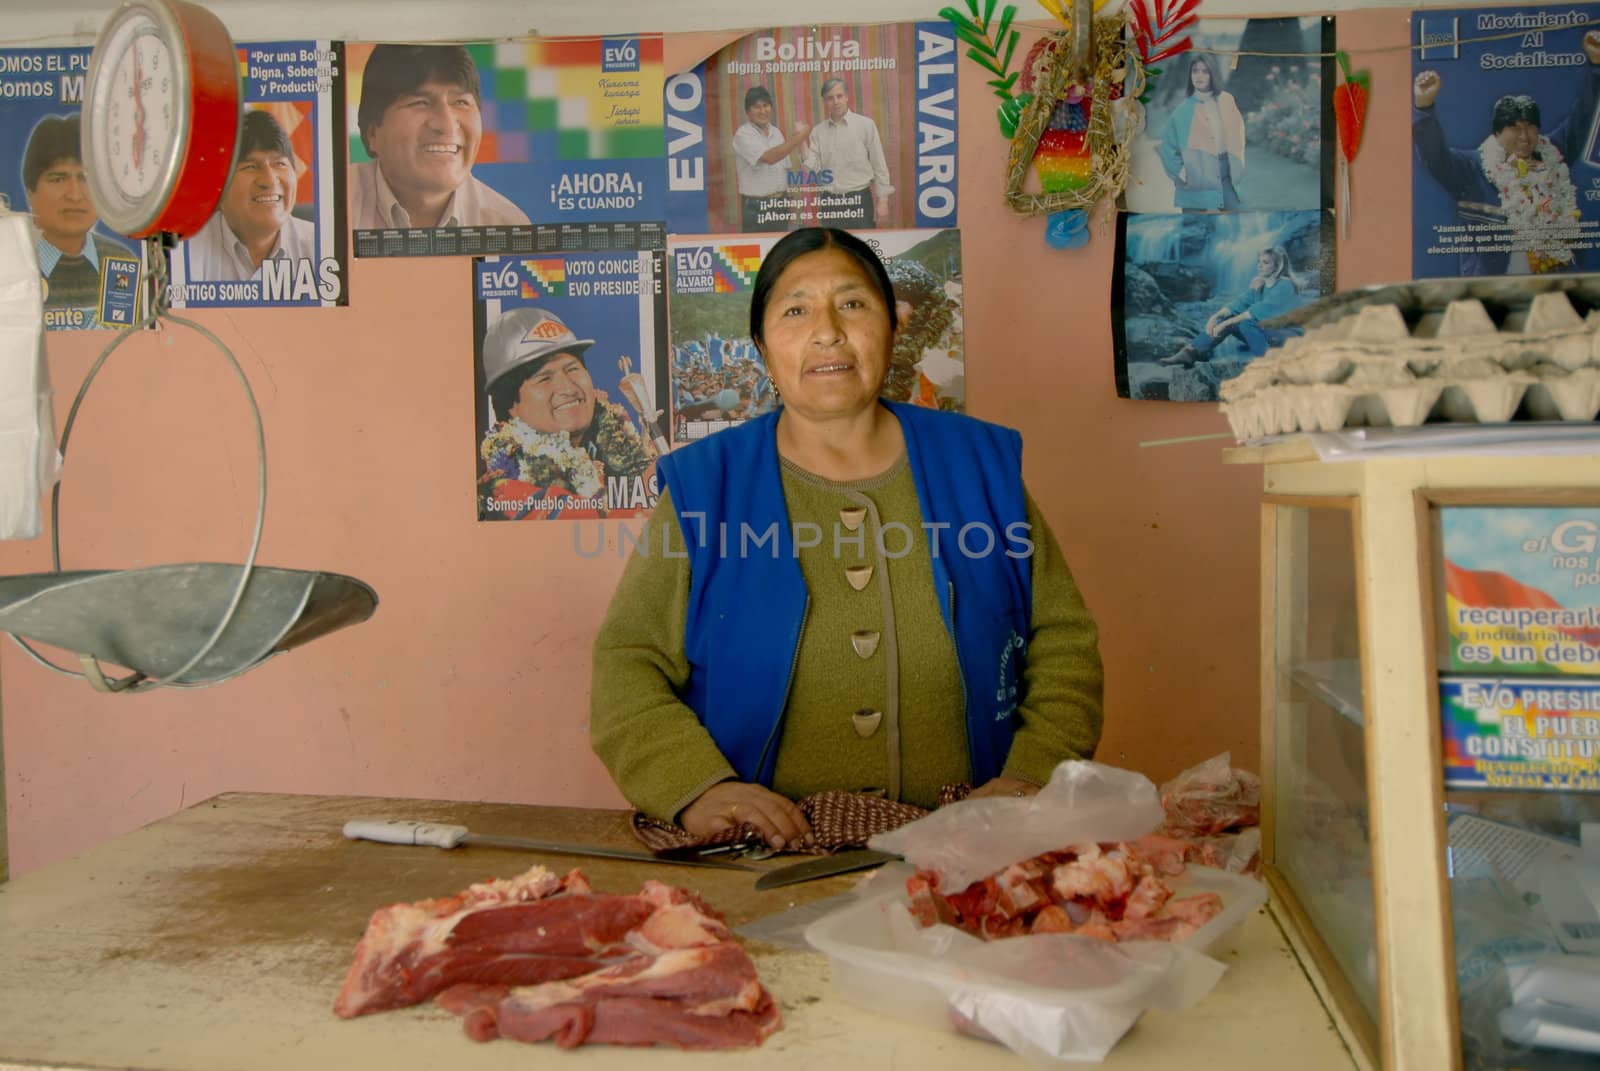 Oruro, Bolivia, June 14, 2006. Esther Morales sister of the President of Bolivia Evo Morales.Esther in his small shop. Esther leads a very modest life, is primarily active in pro-poor